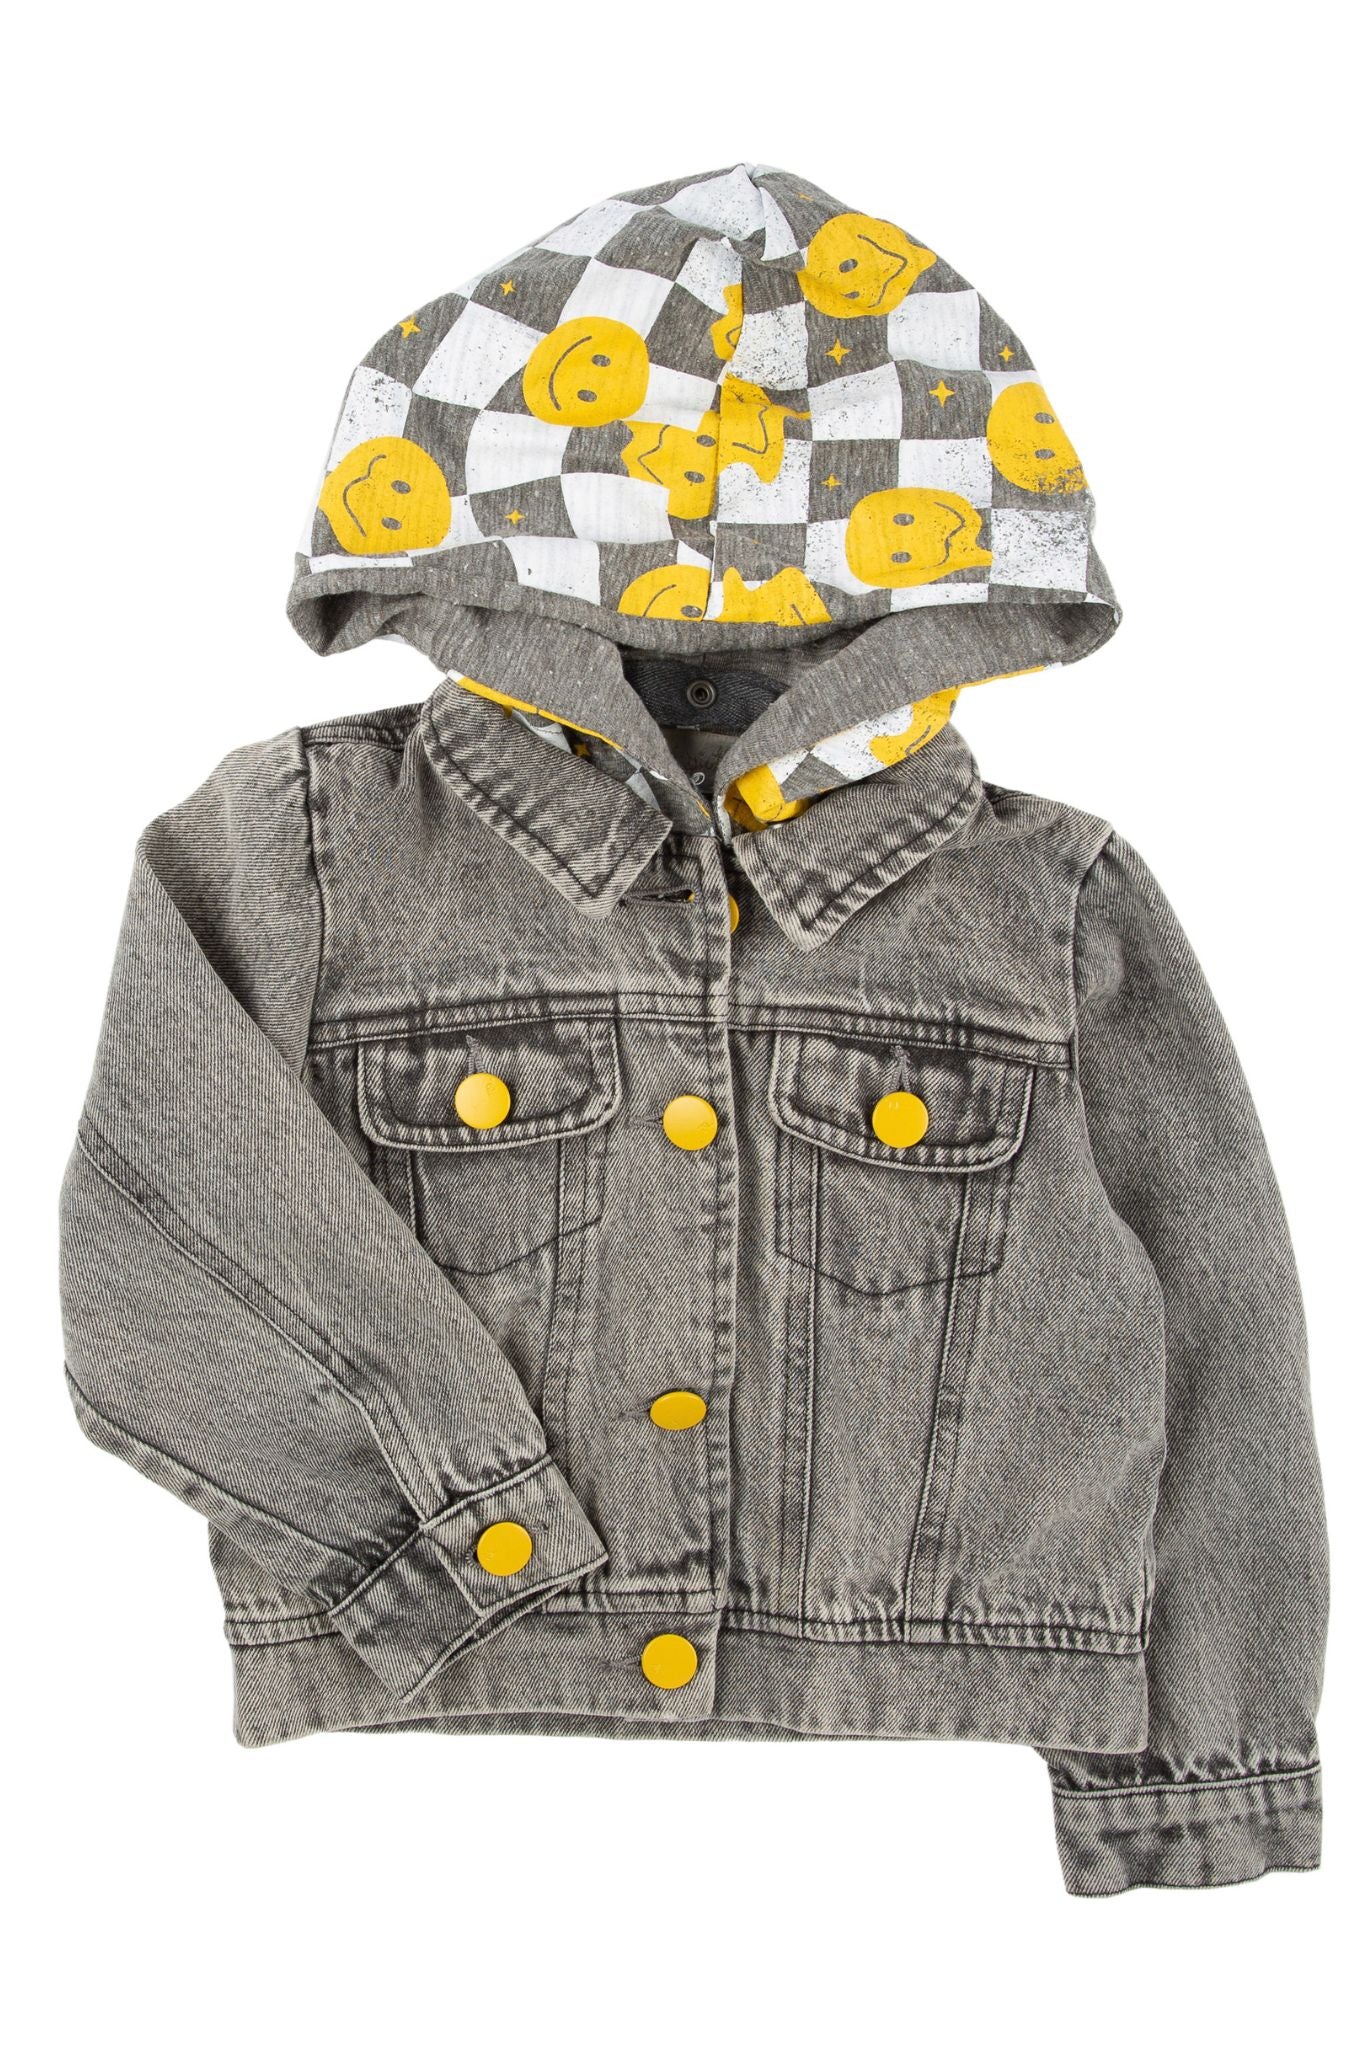 Buy Boys Jean Jacket Removable Hooded Toddler Kids Girls Denim Jacket  Button Coat Top Outwear (Blue, 11-12Y (150CM)) at Amazon.in